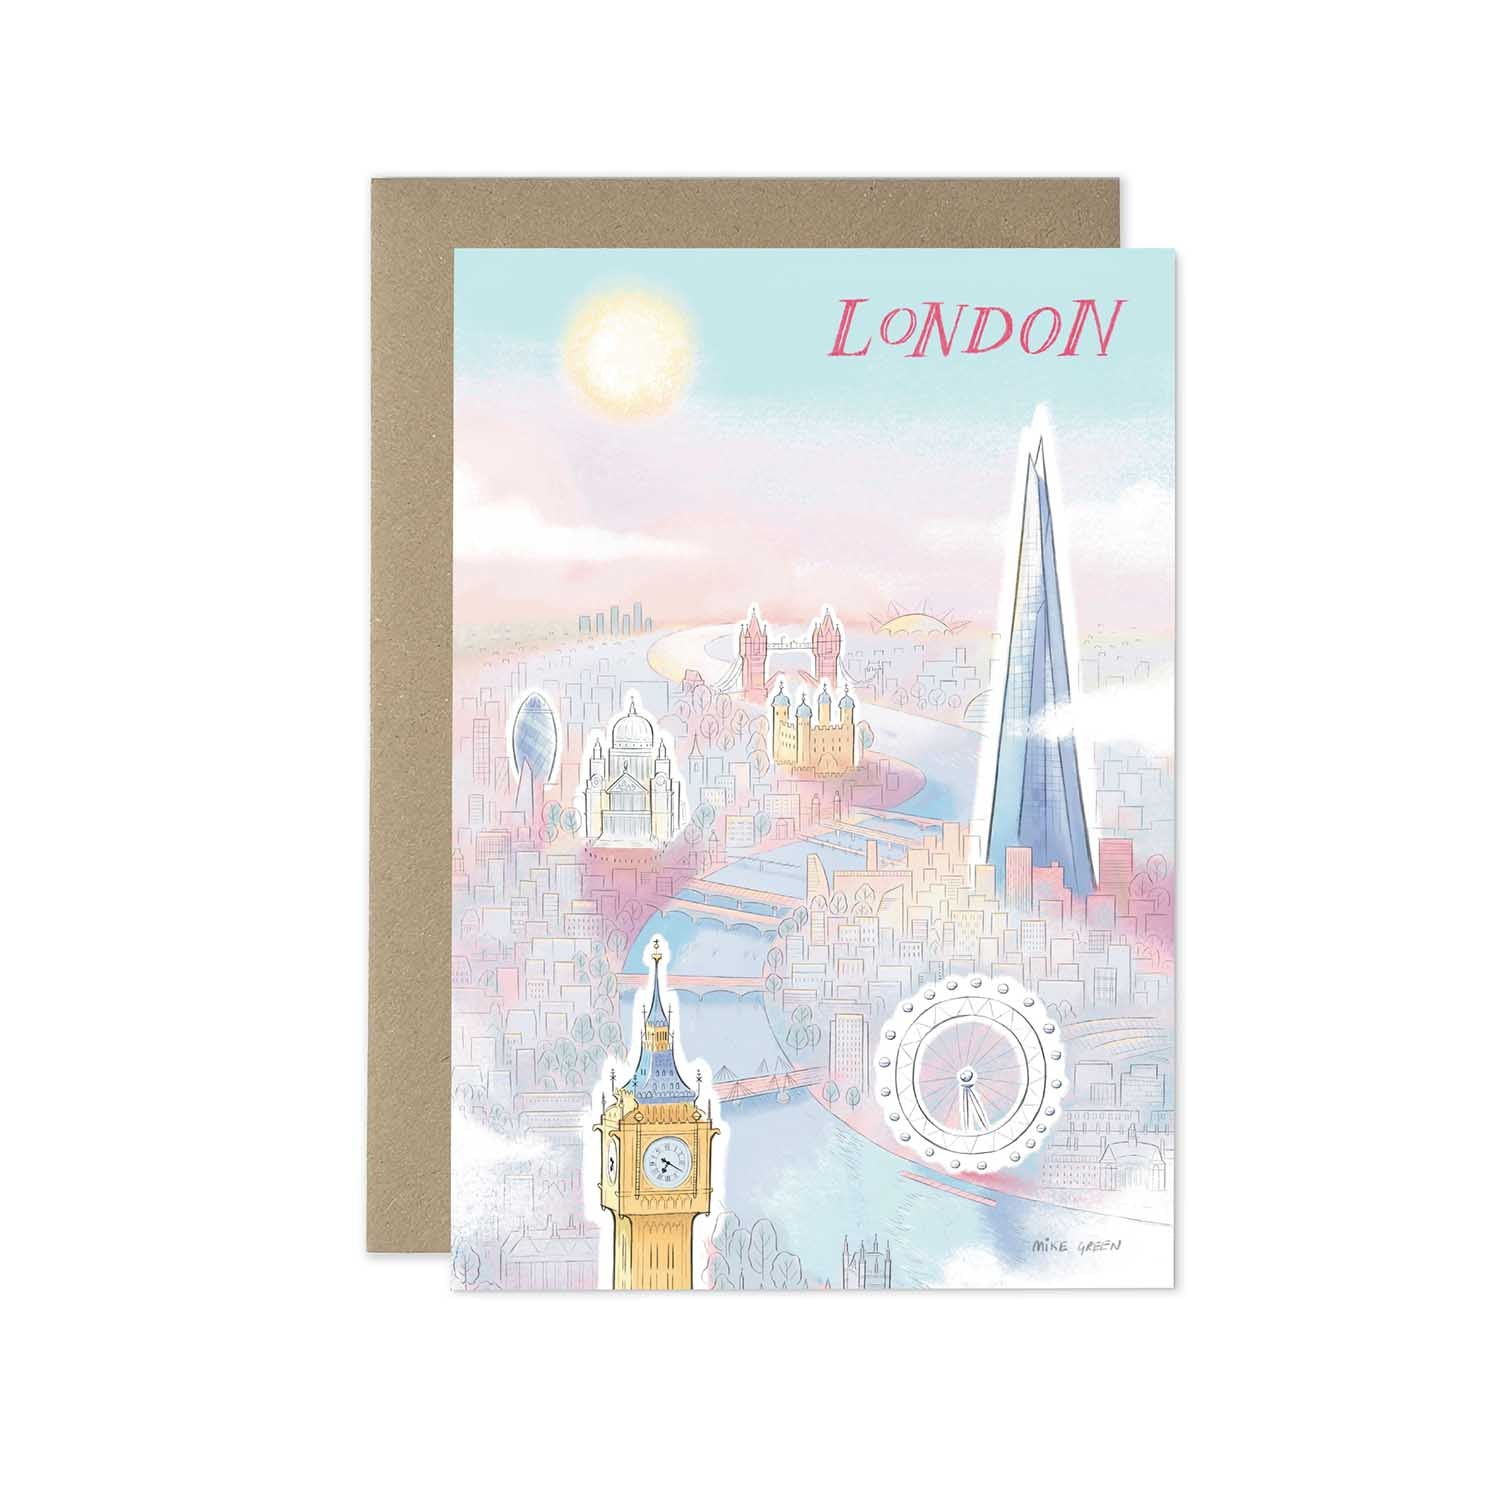 London and some of its landmarks beautifully illustrated on a greeting card by mike green illustration.